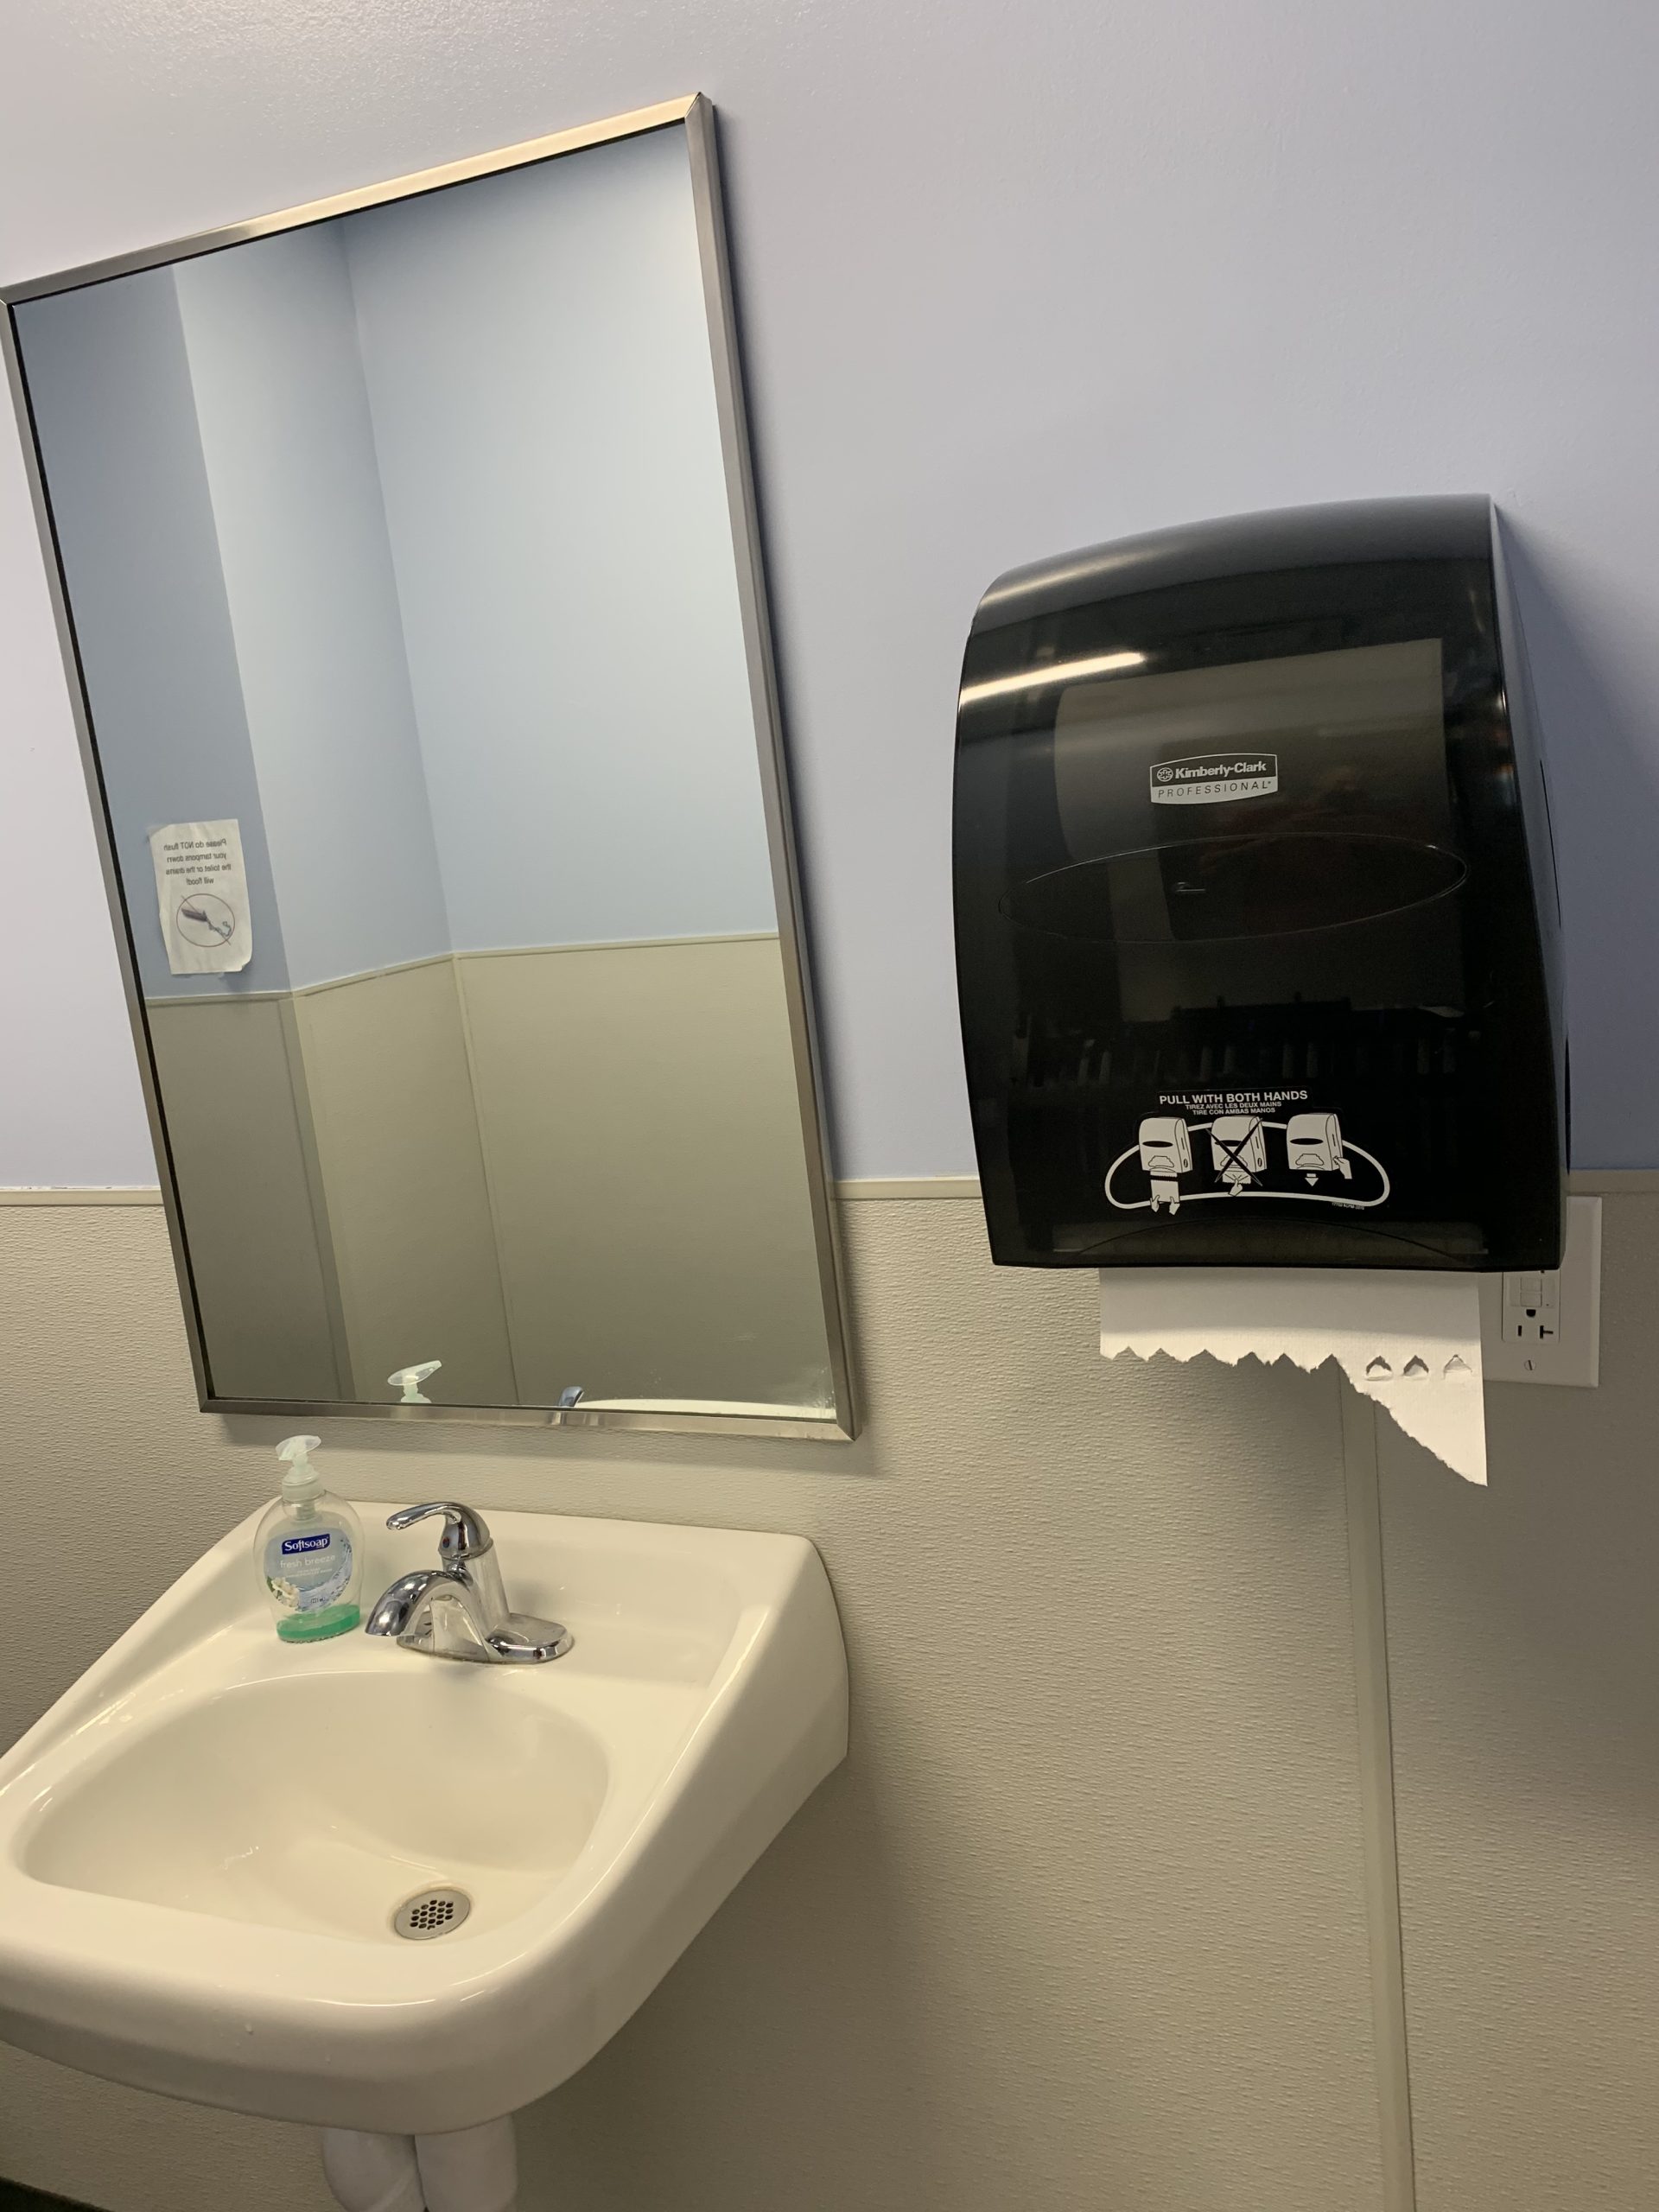 Mount Mirror with Roll Towel Dispenser